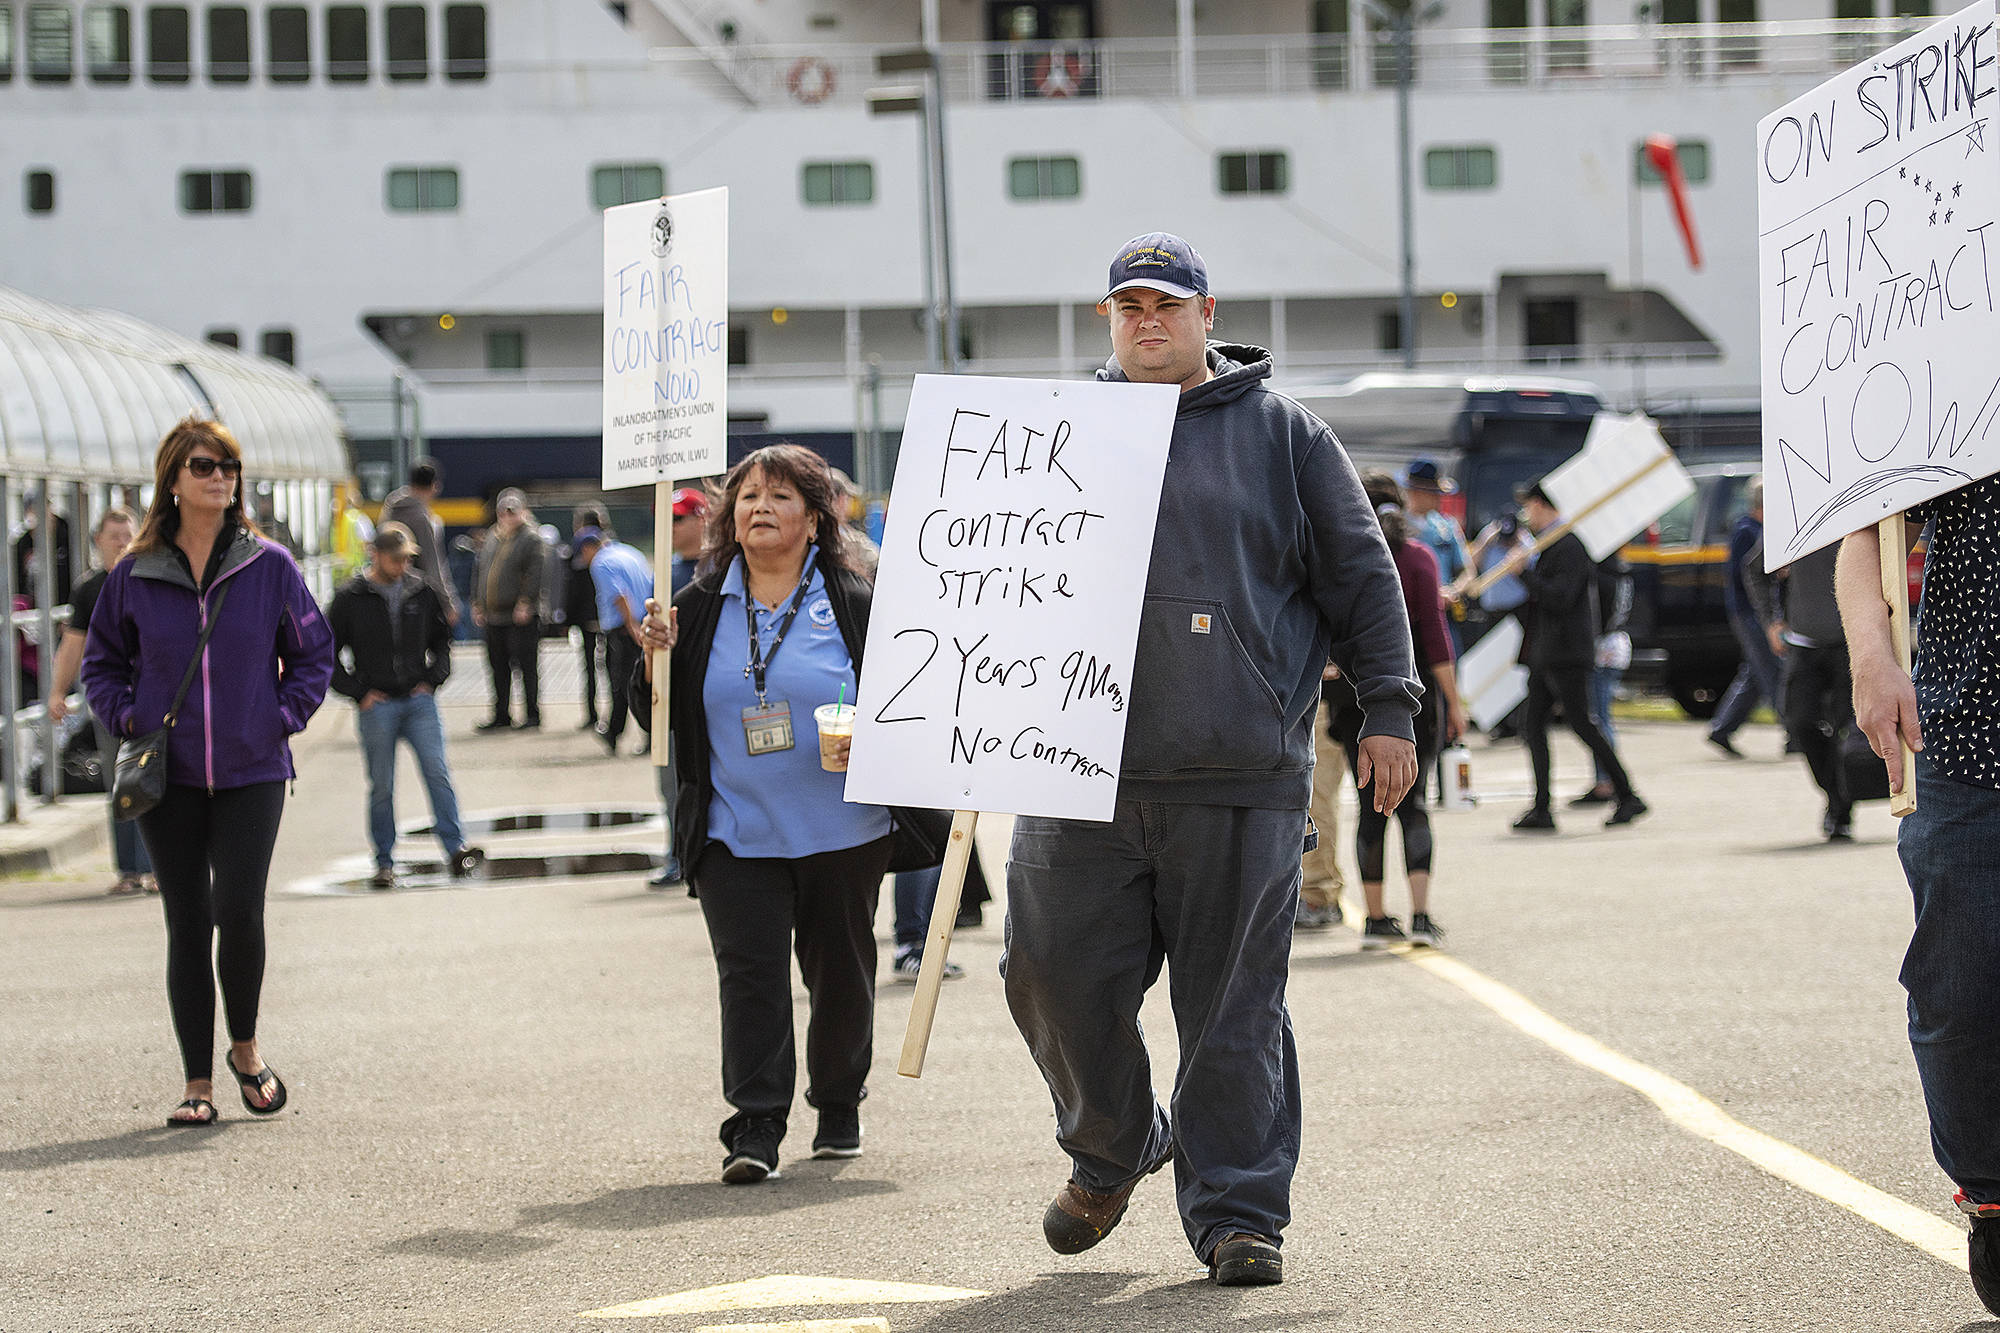 Alaska Marine Highway System workers assemble next to the AMHS ferry Columbia for an Inlandboatmen’s Union of the Pacific strike after failing to reach agreement on a contract with the state of Alaska, Wednesday, July 24, 2019, in Ketchikan, Alaska. (Dustin Safranek/Ketchikan Daily News via AP)